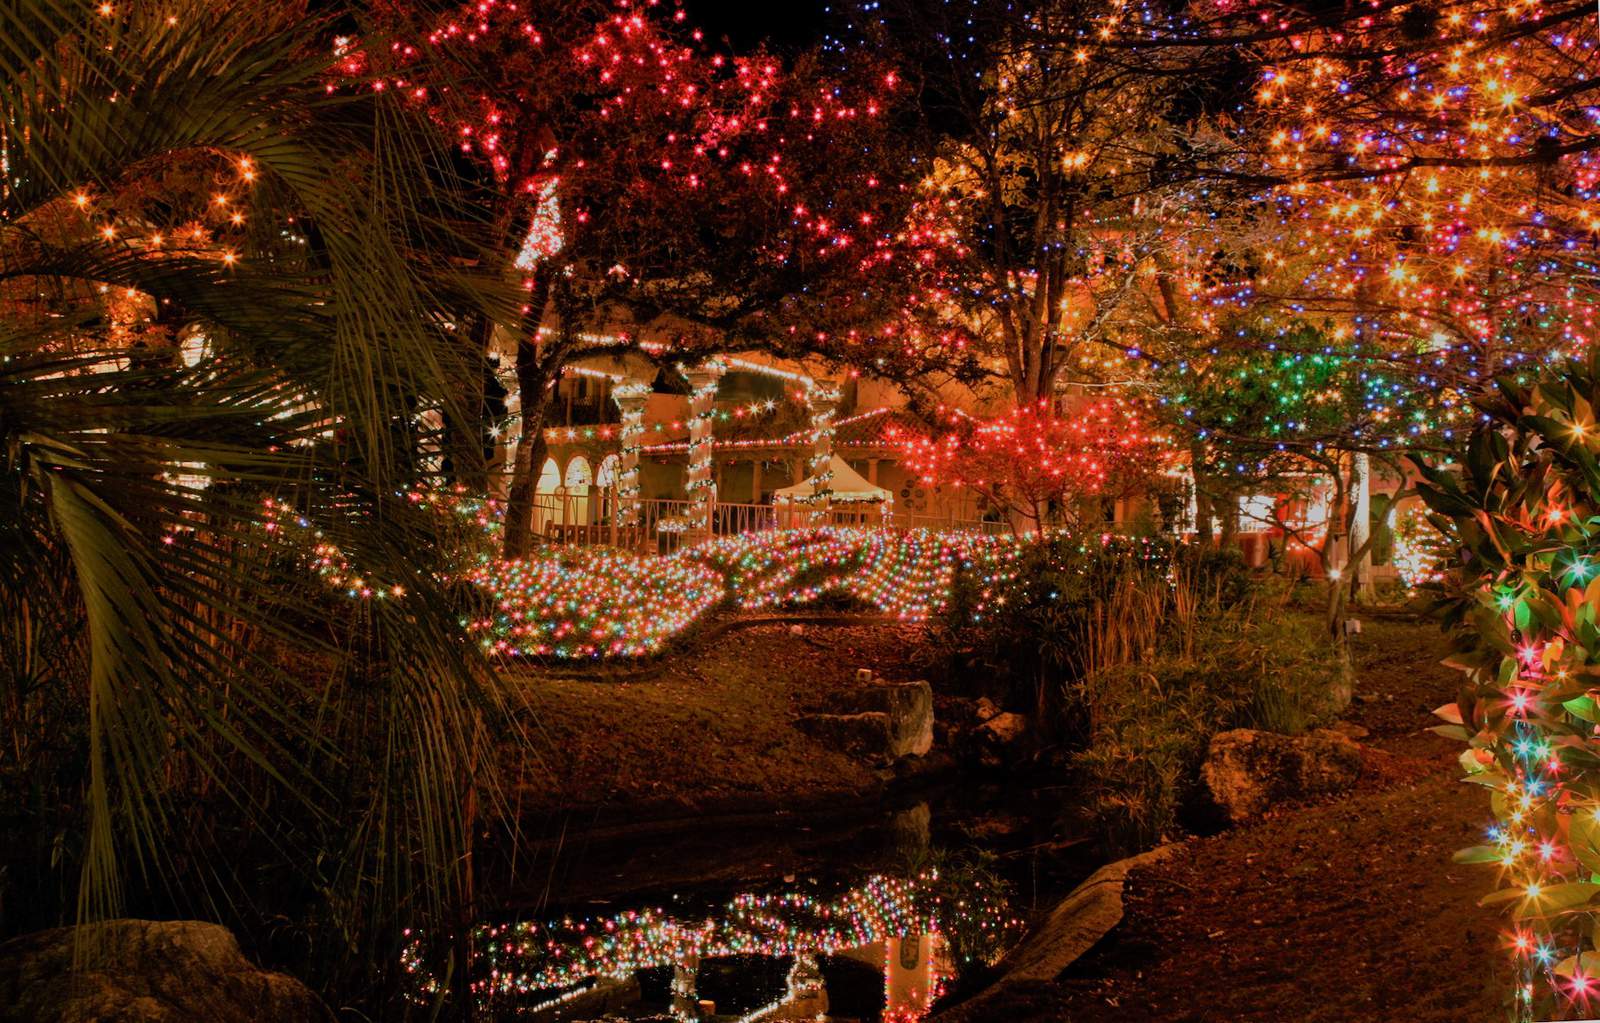 9 things to look forward to in San Antonio now that we’ve made it to December